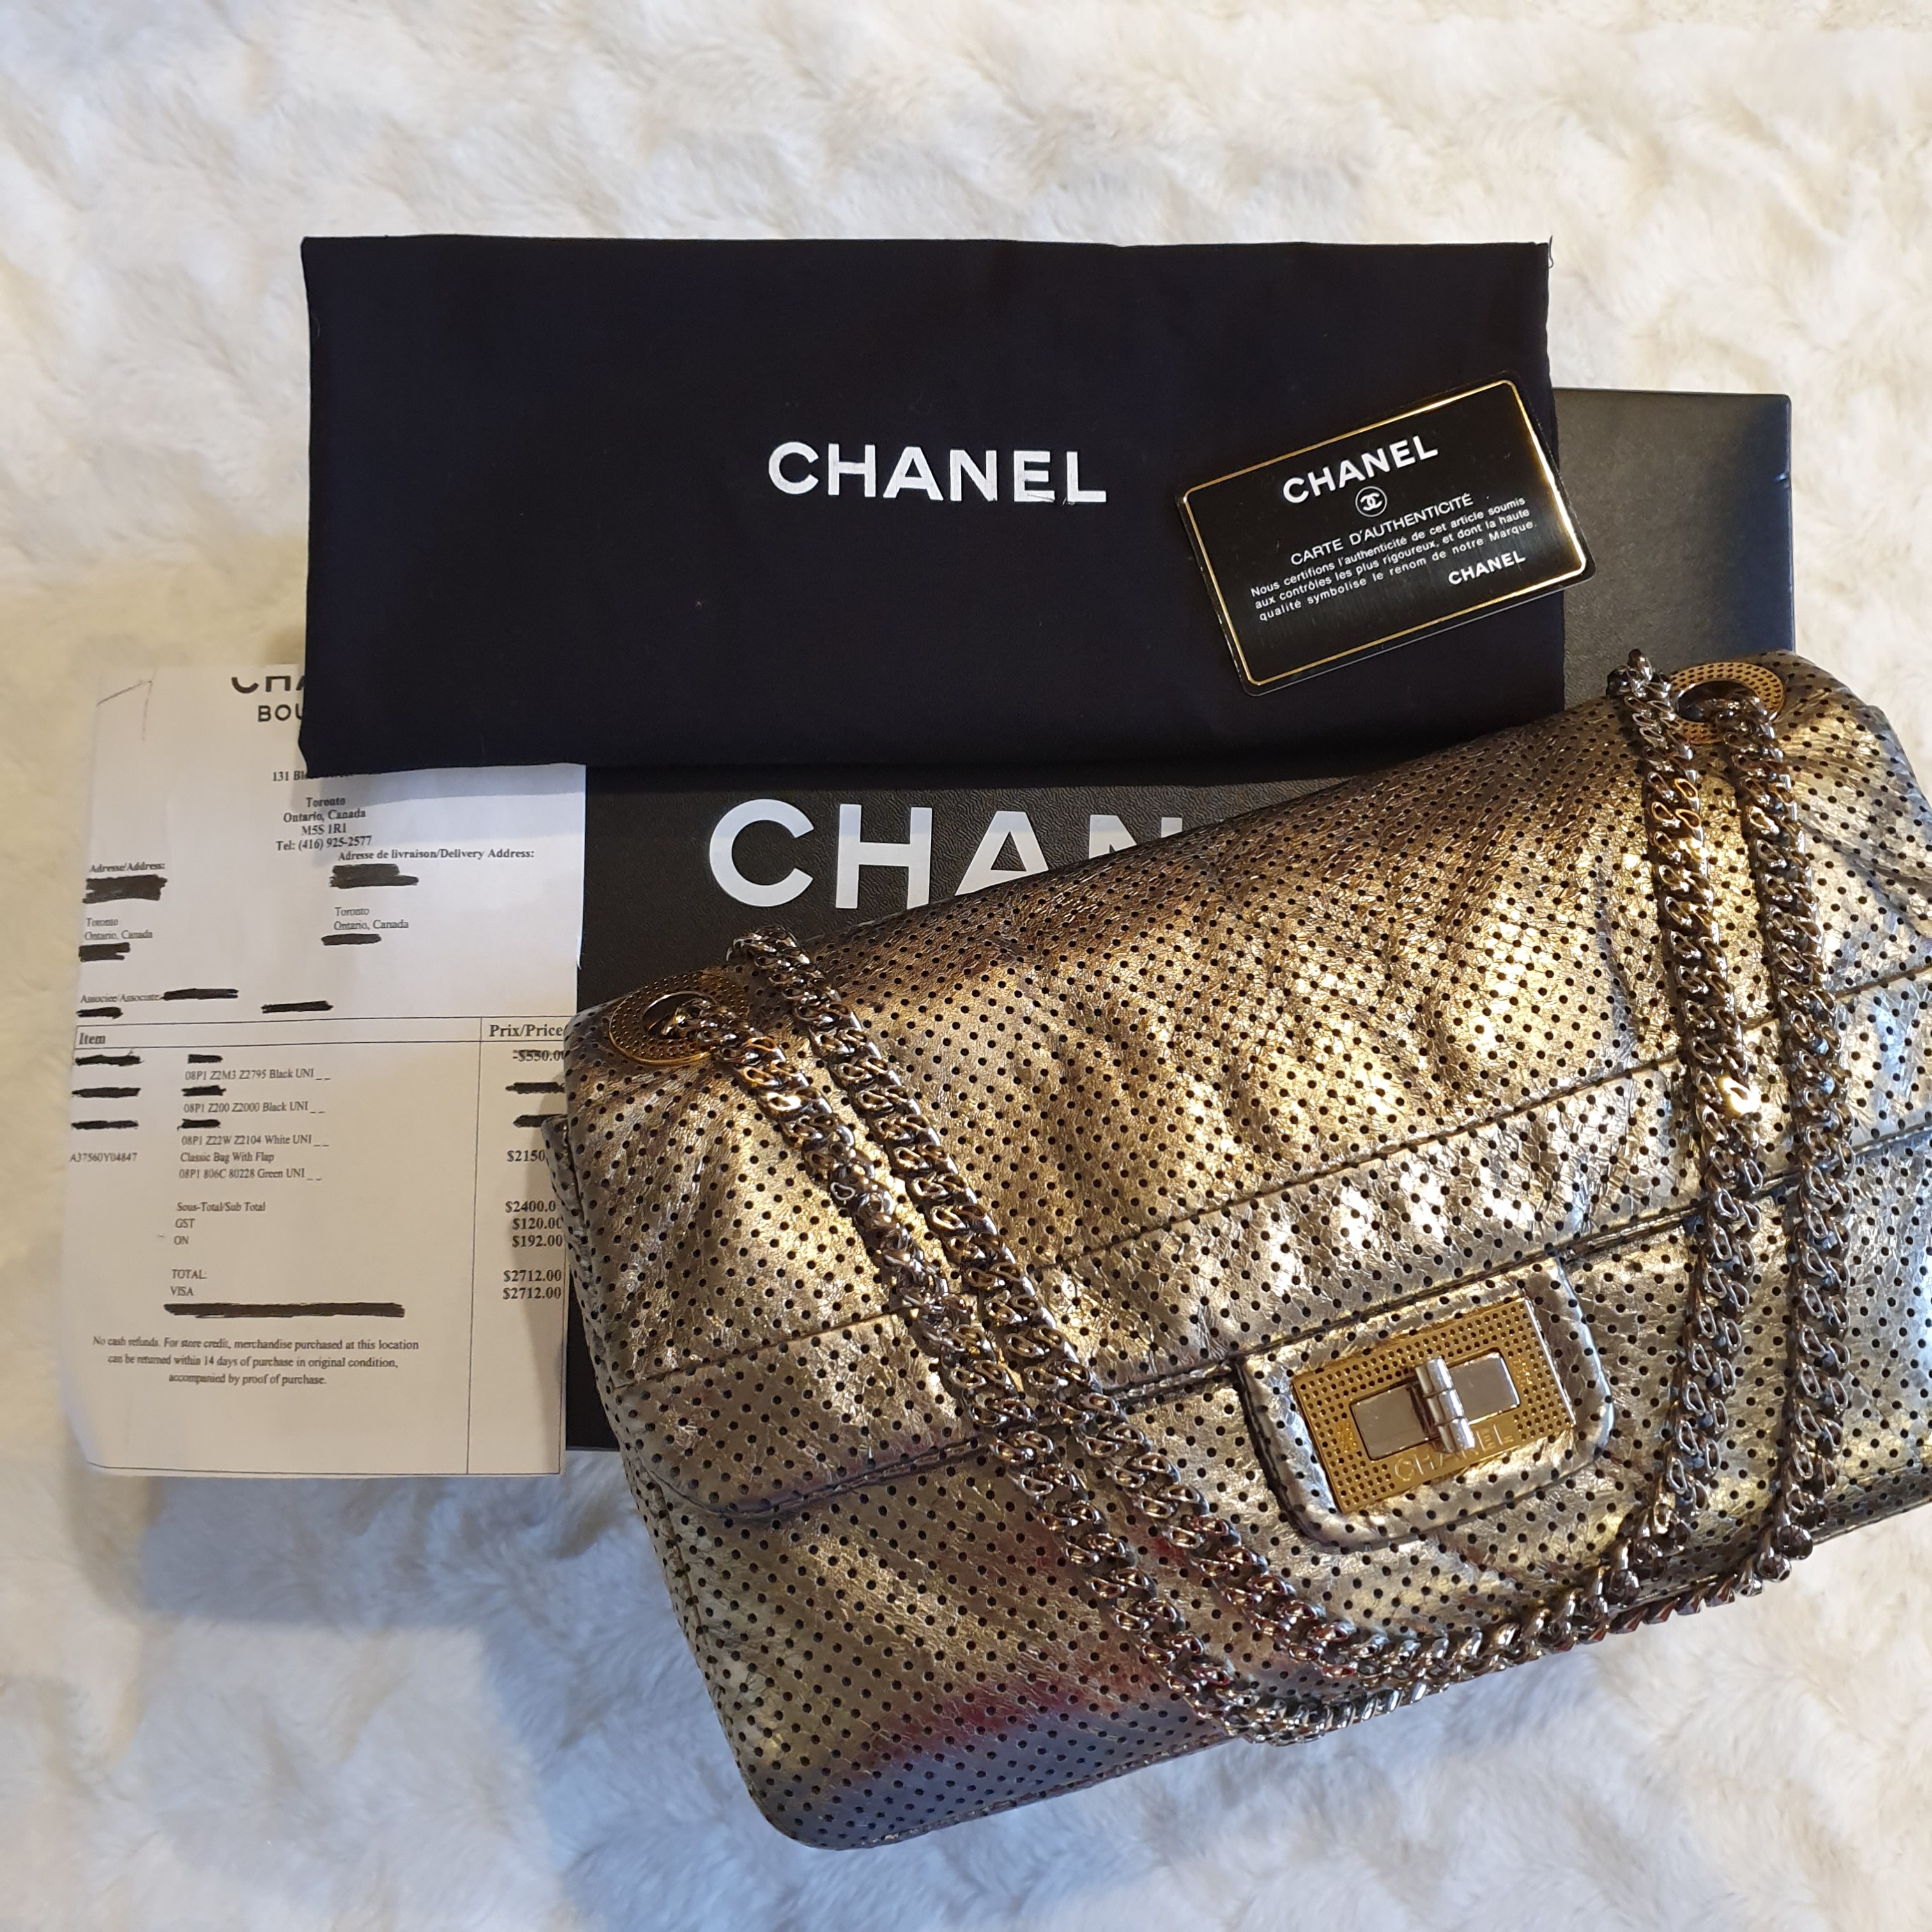 Chanel Metallic Silver Drill Perforated Leather Reissue 2.55 Classic Flap  Bag Chanel